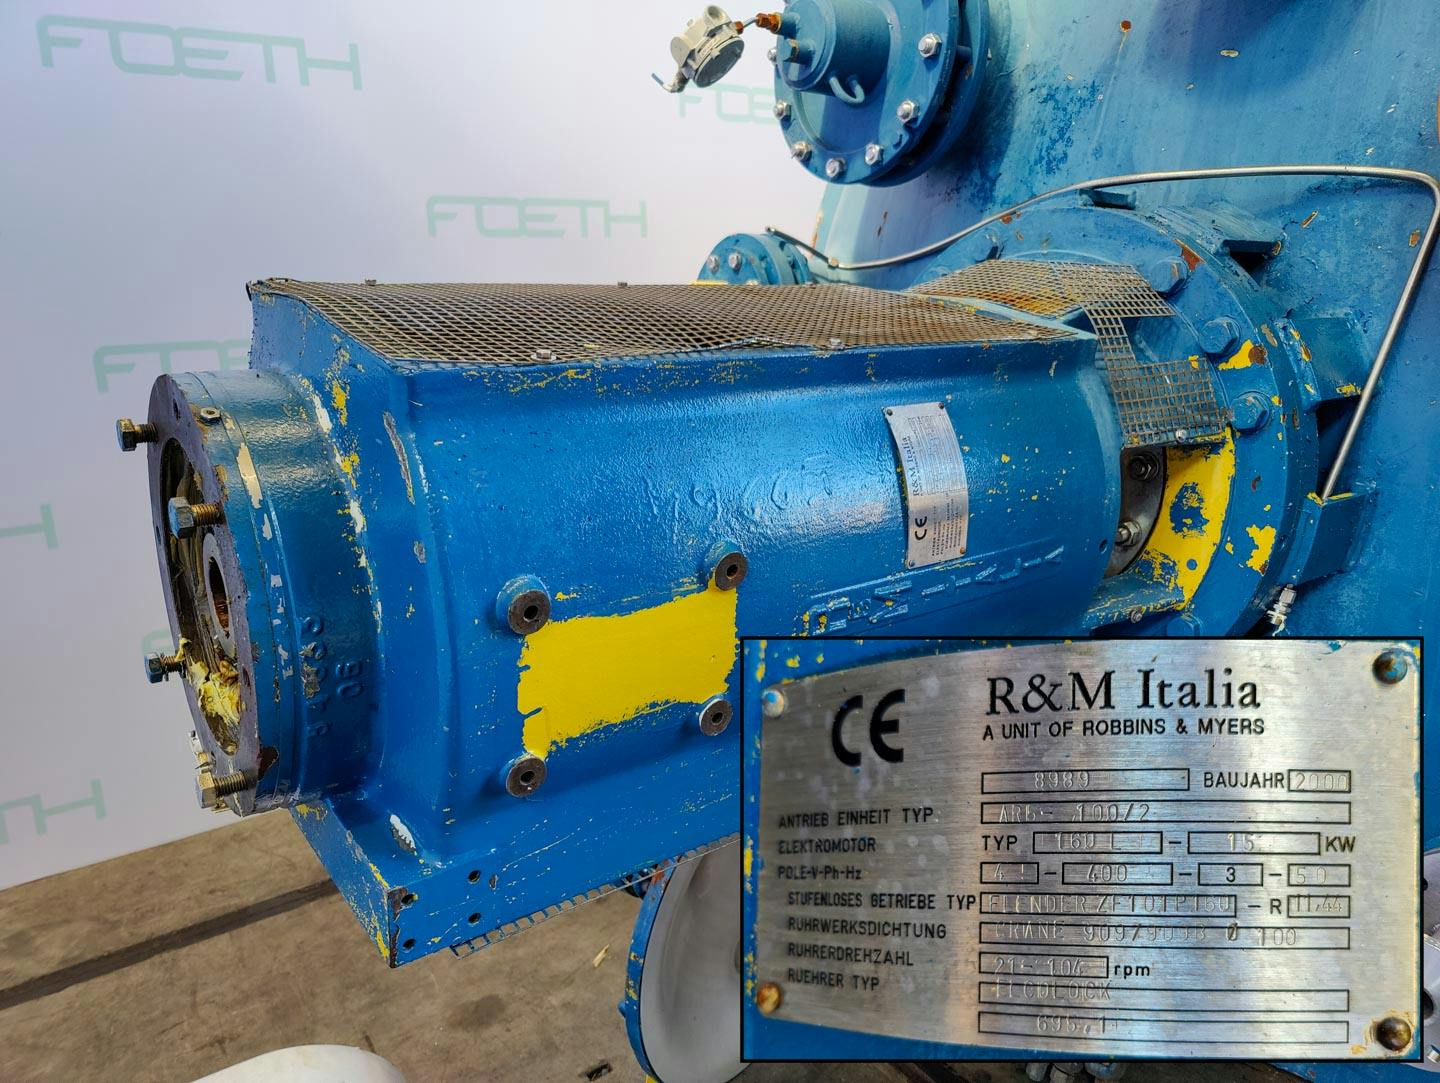 R&M Italia BE 6300 - Glass-lined Reactor - image 10